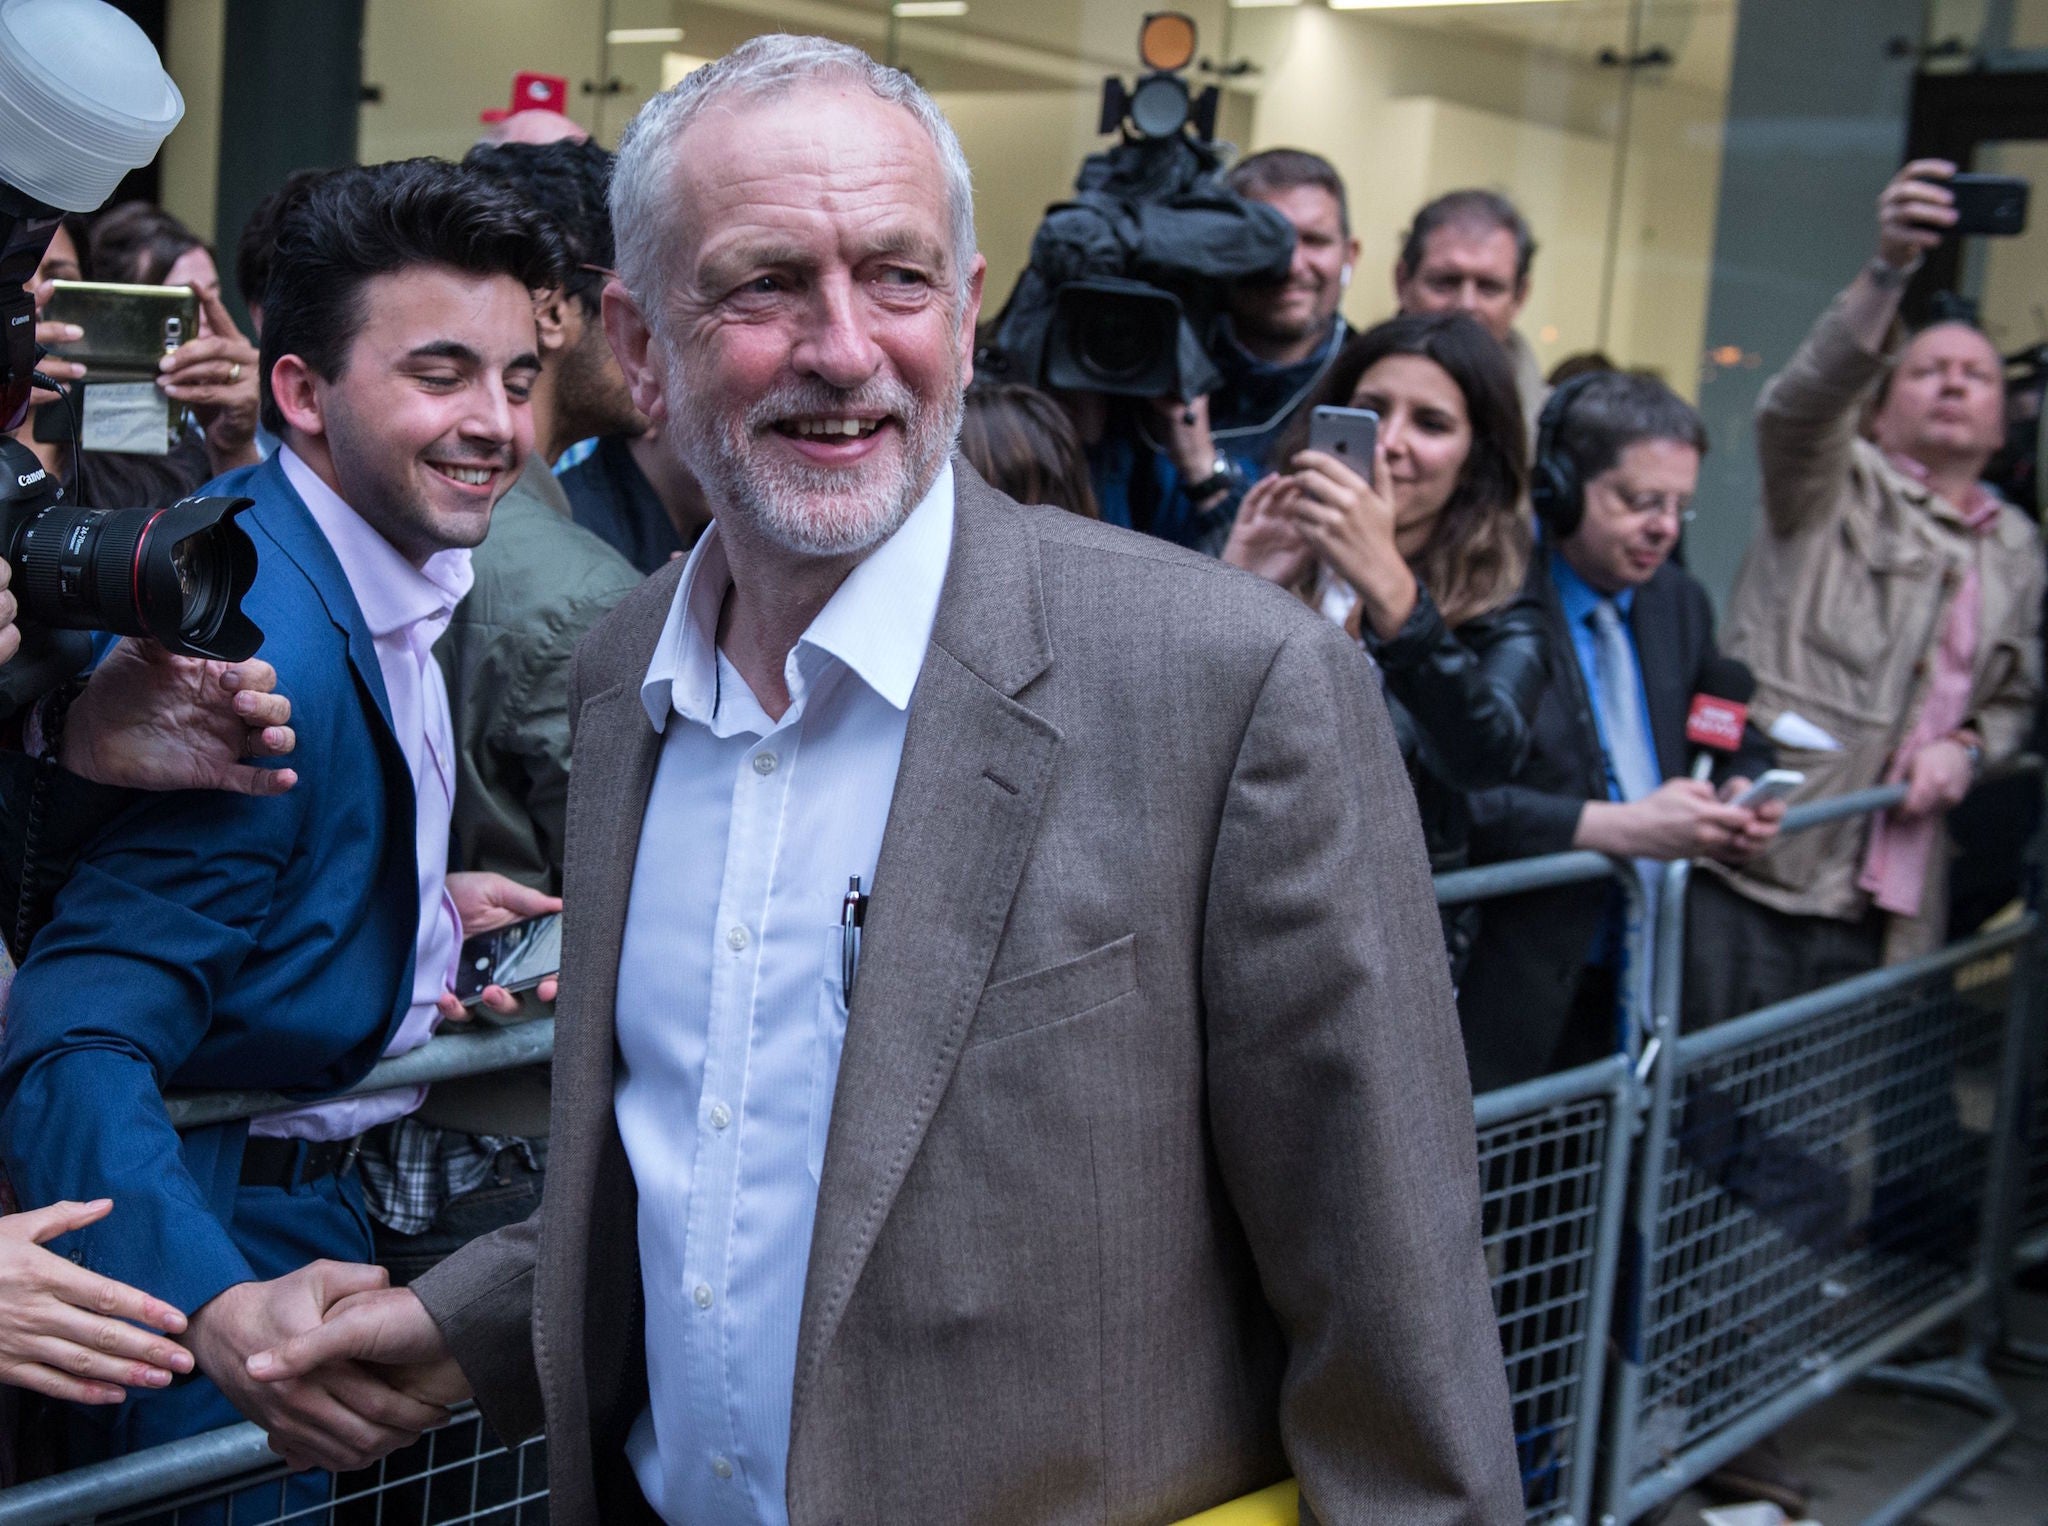 The media was biased against Mr Corbyn, the report found